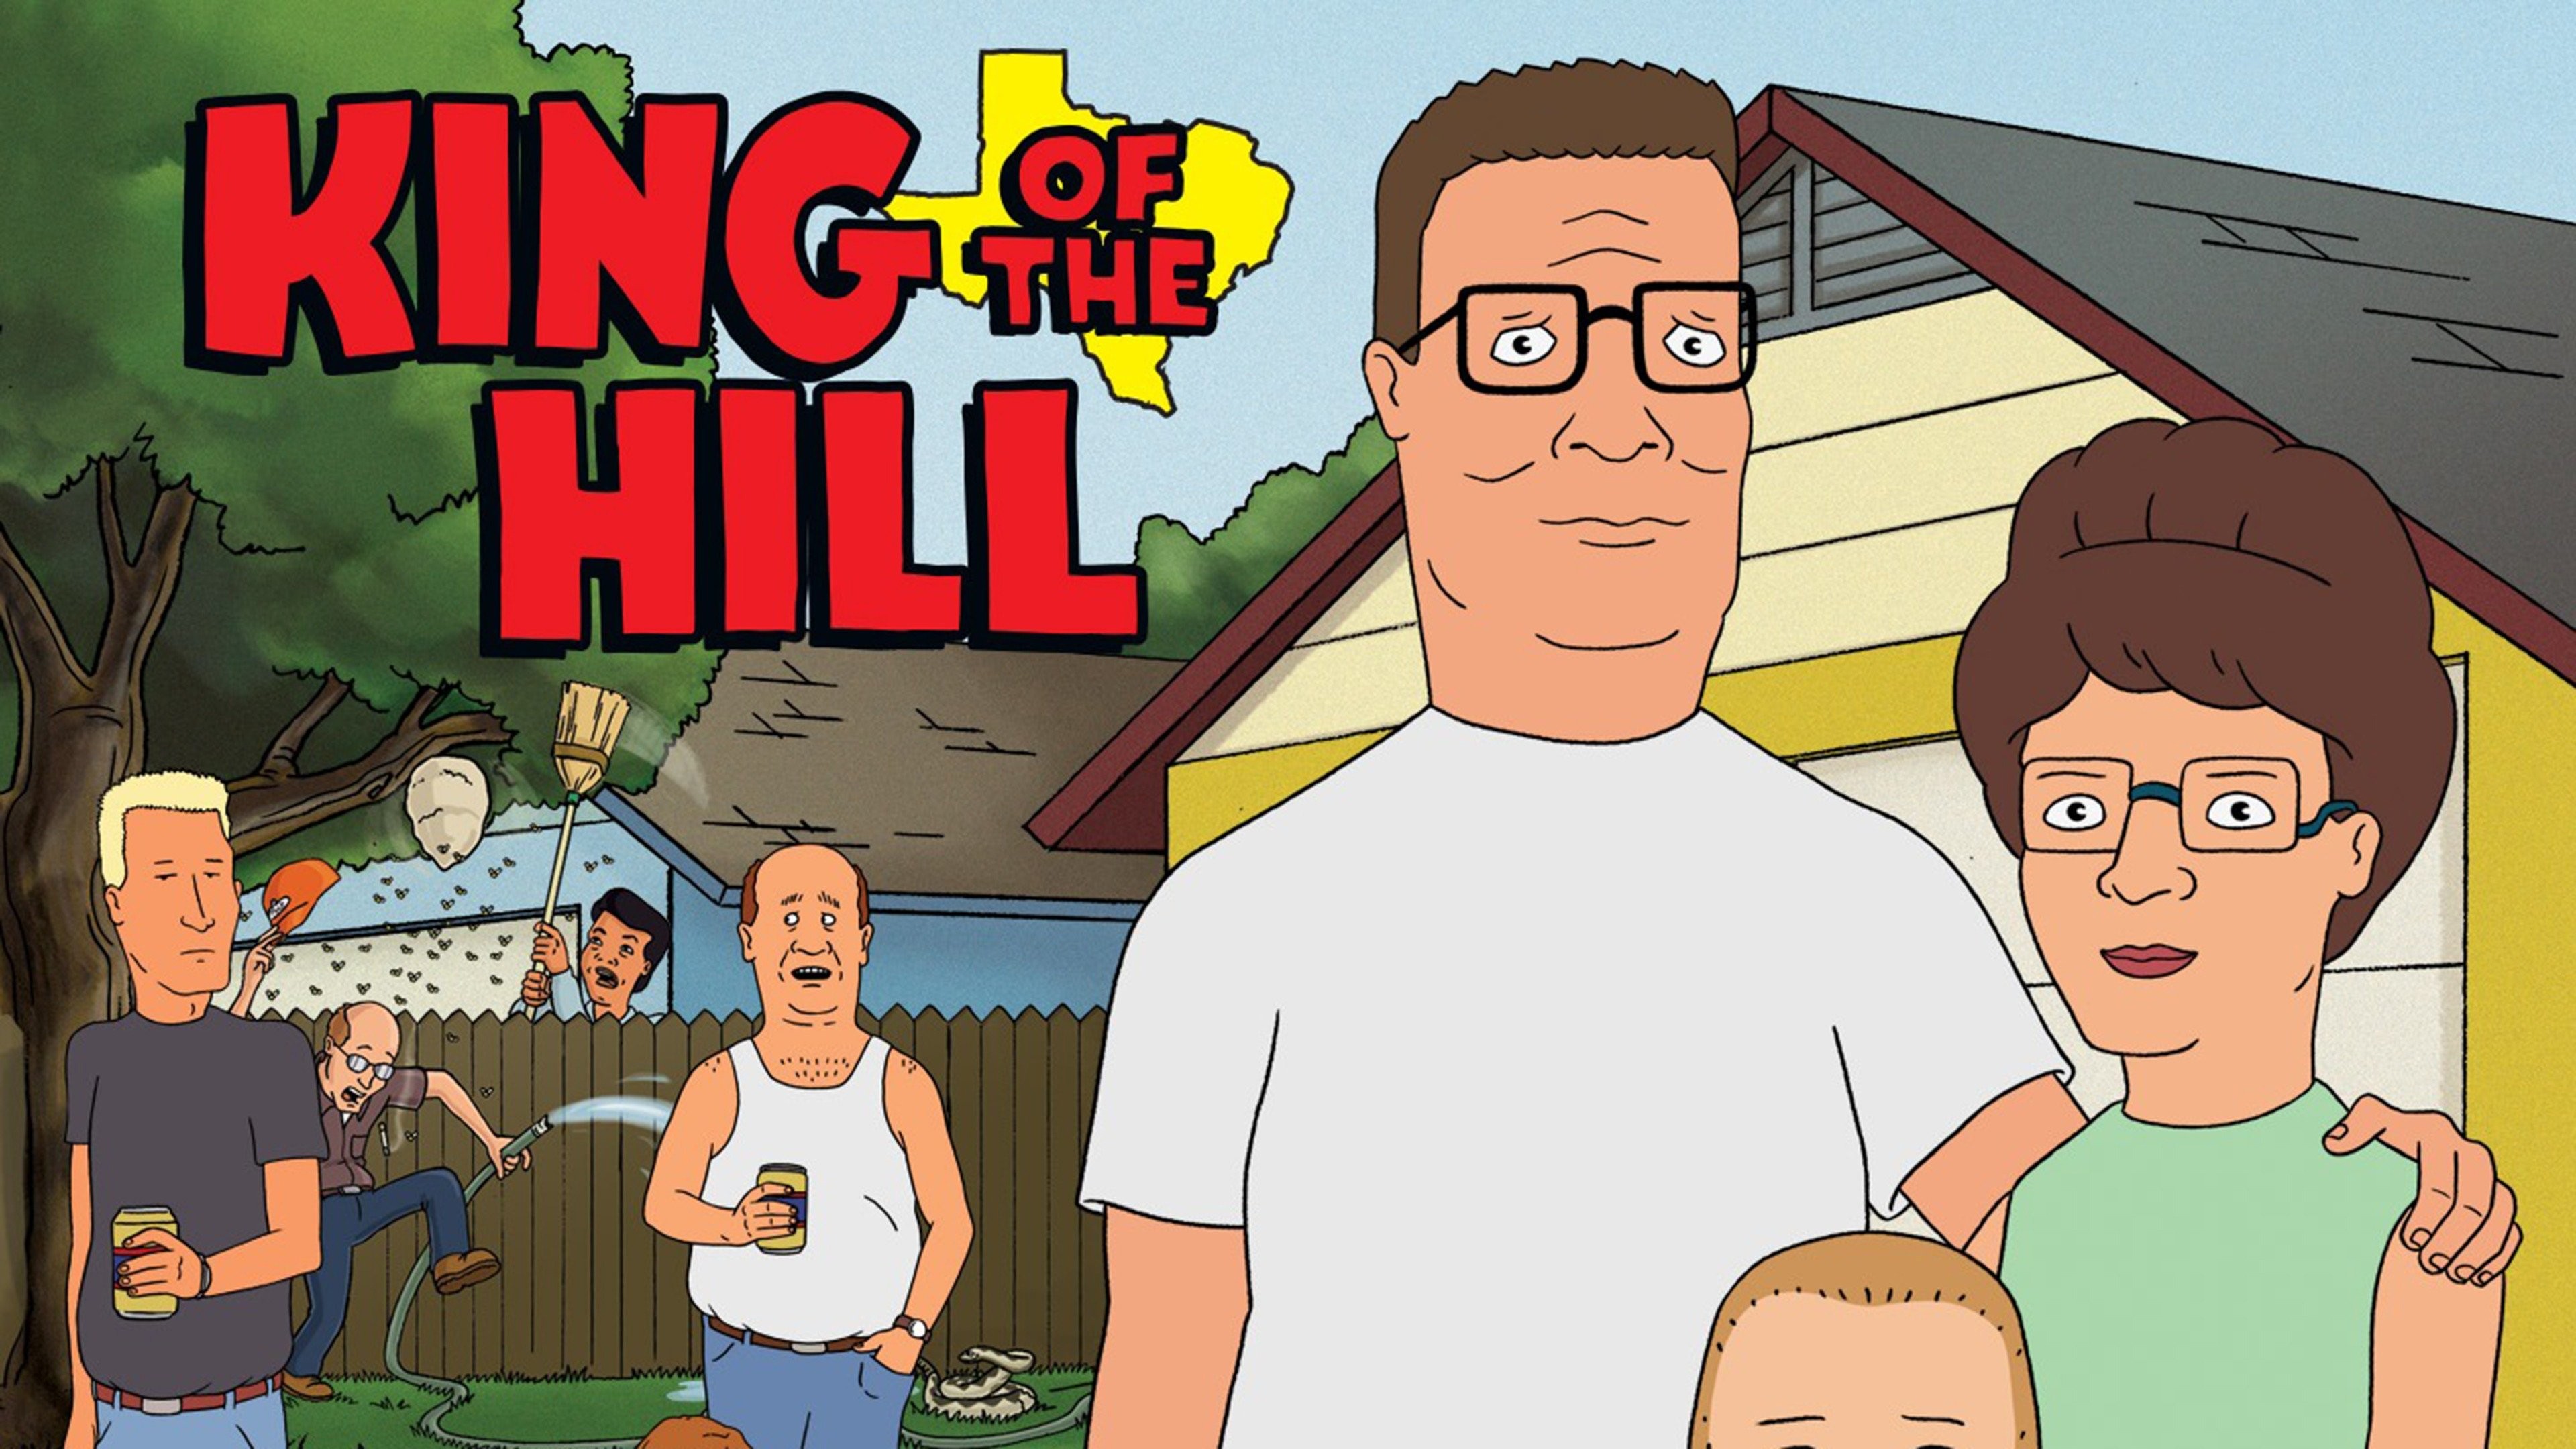 Hank Hill on Twitter  King of the hill, Bobby hill, Iconic television  characters